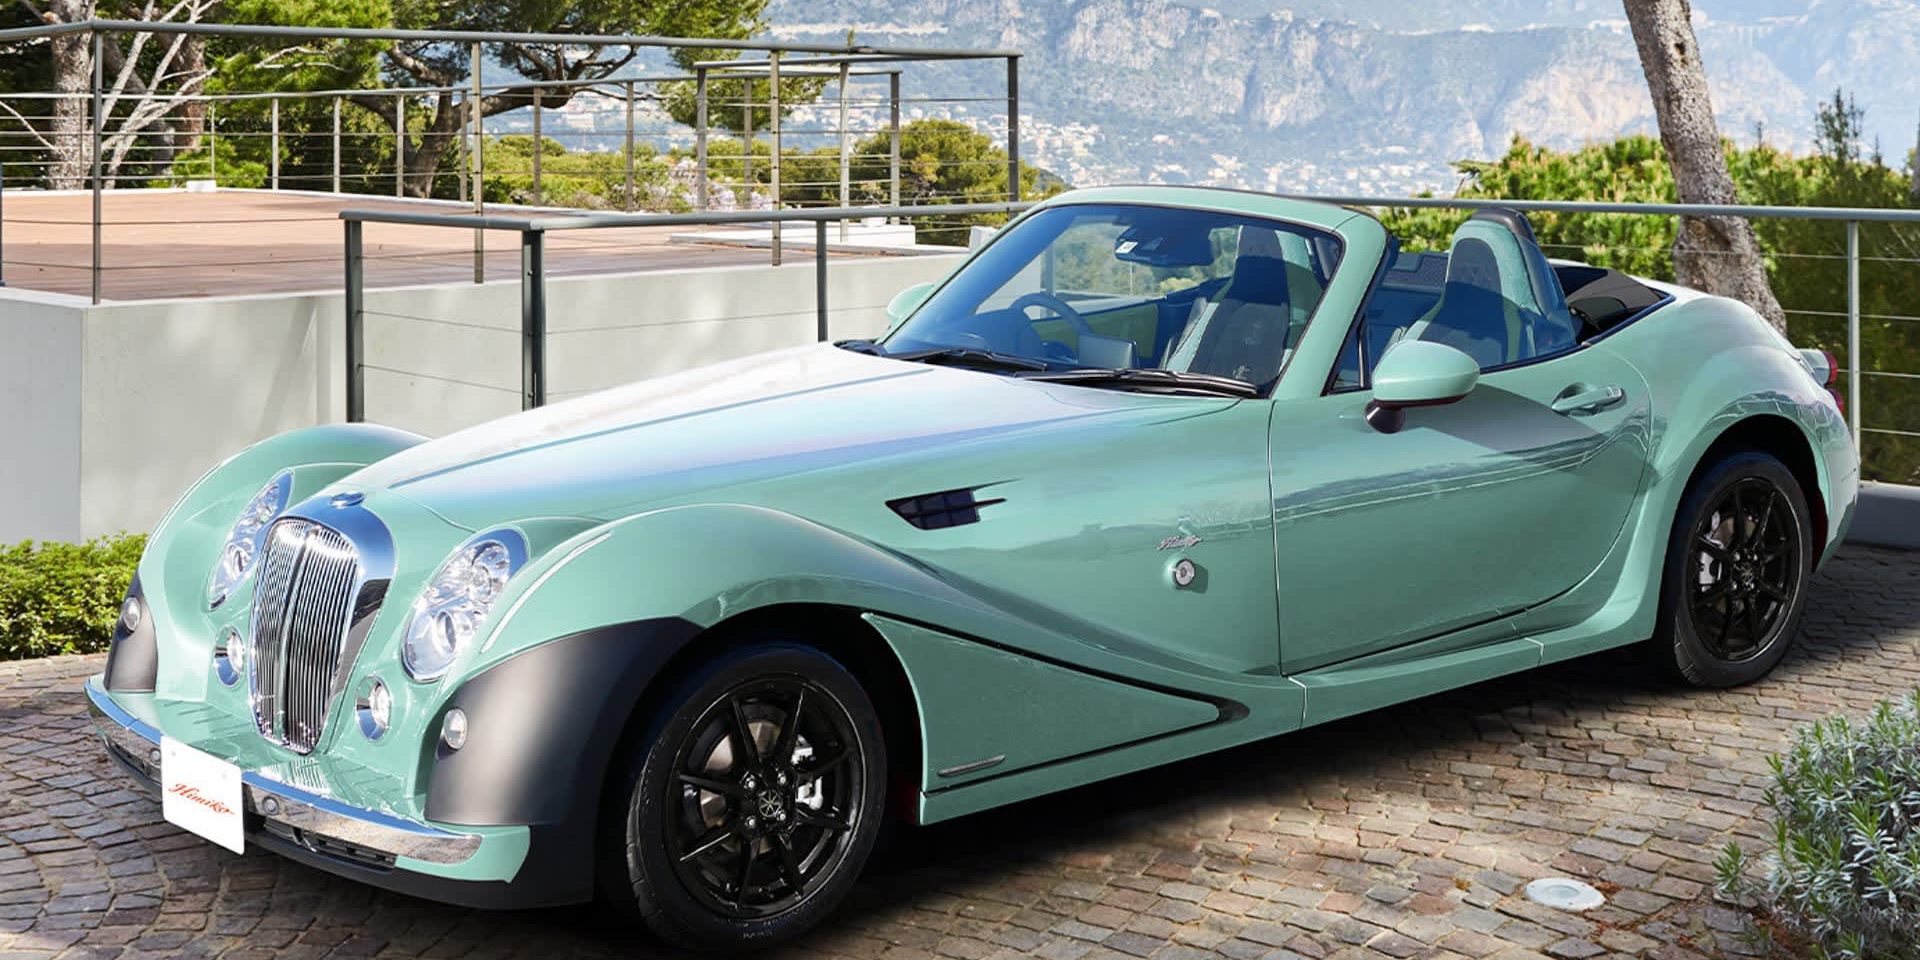 Japanese company turns Mazda MX-5 into vintage-styled roadster